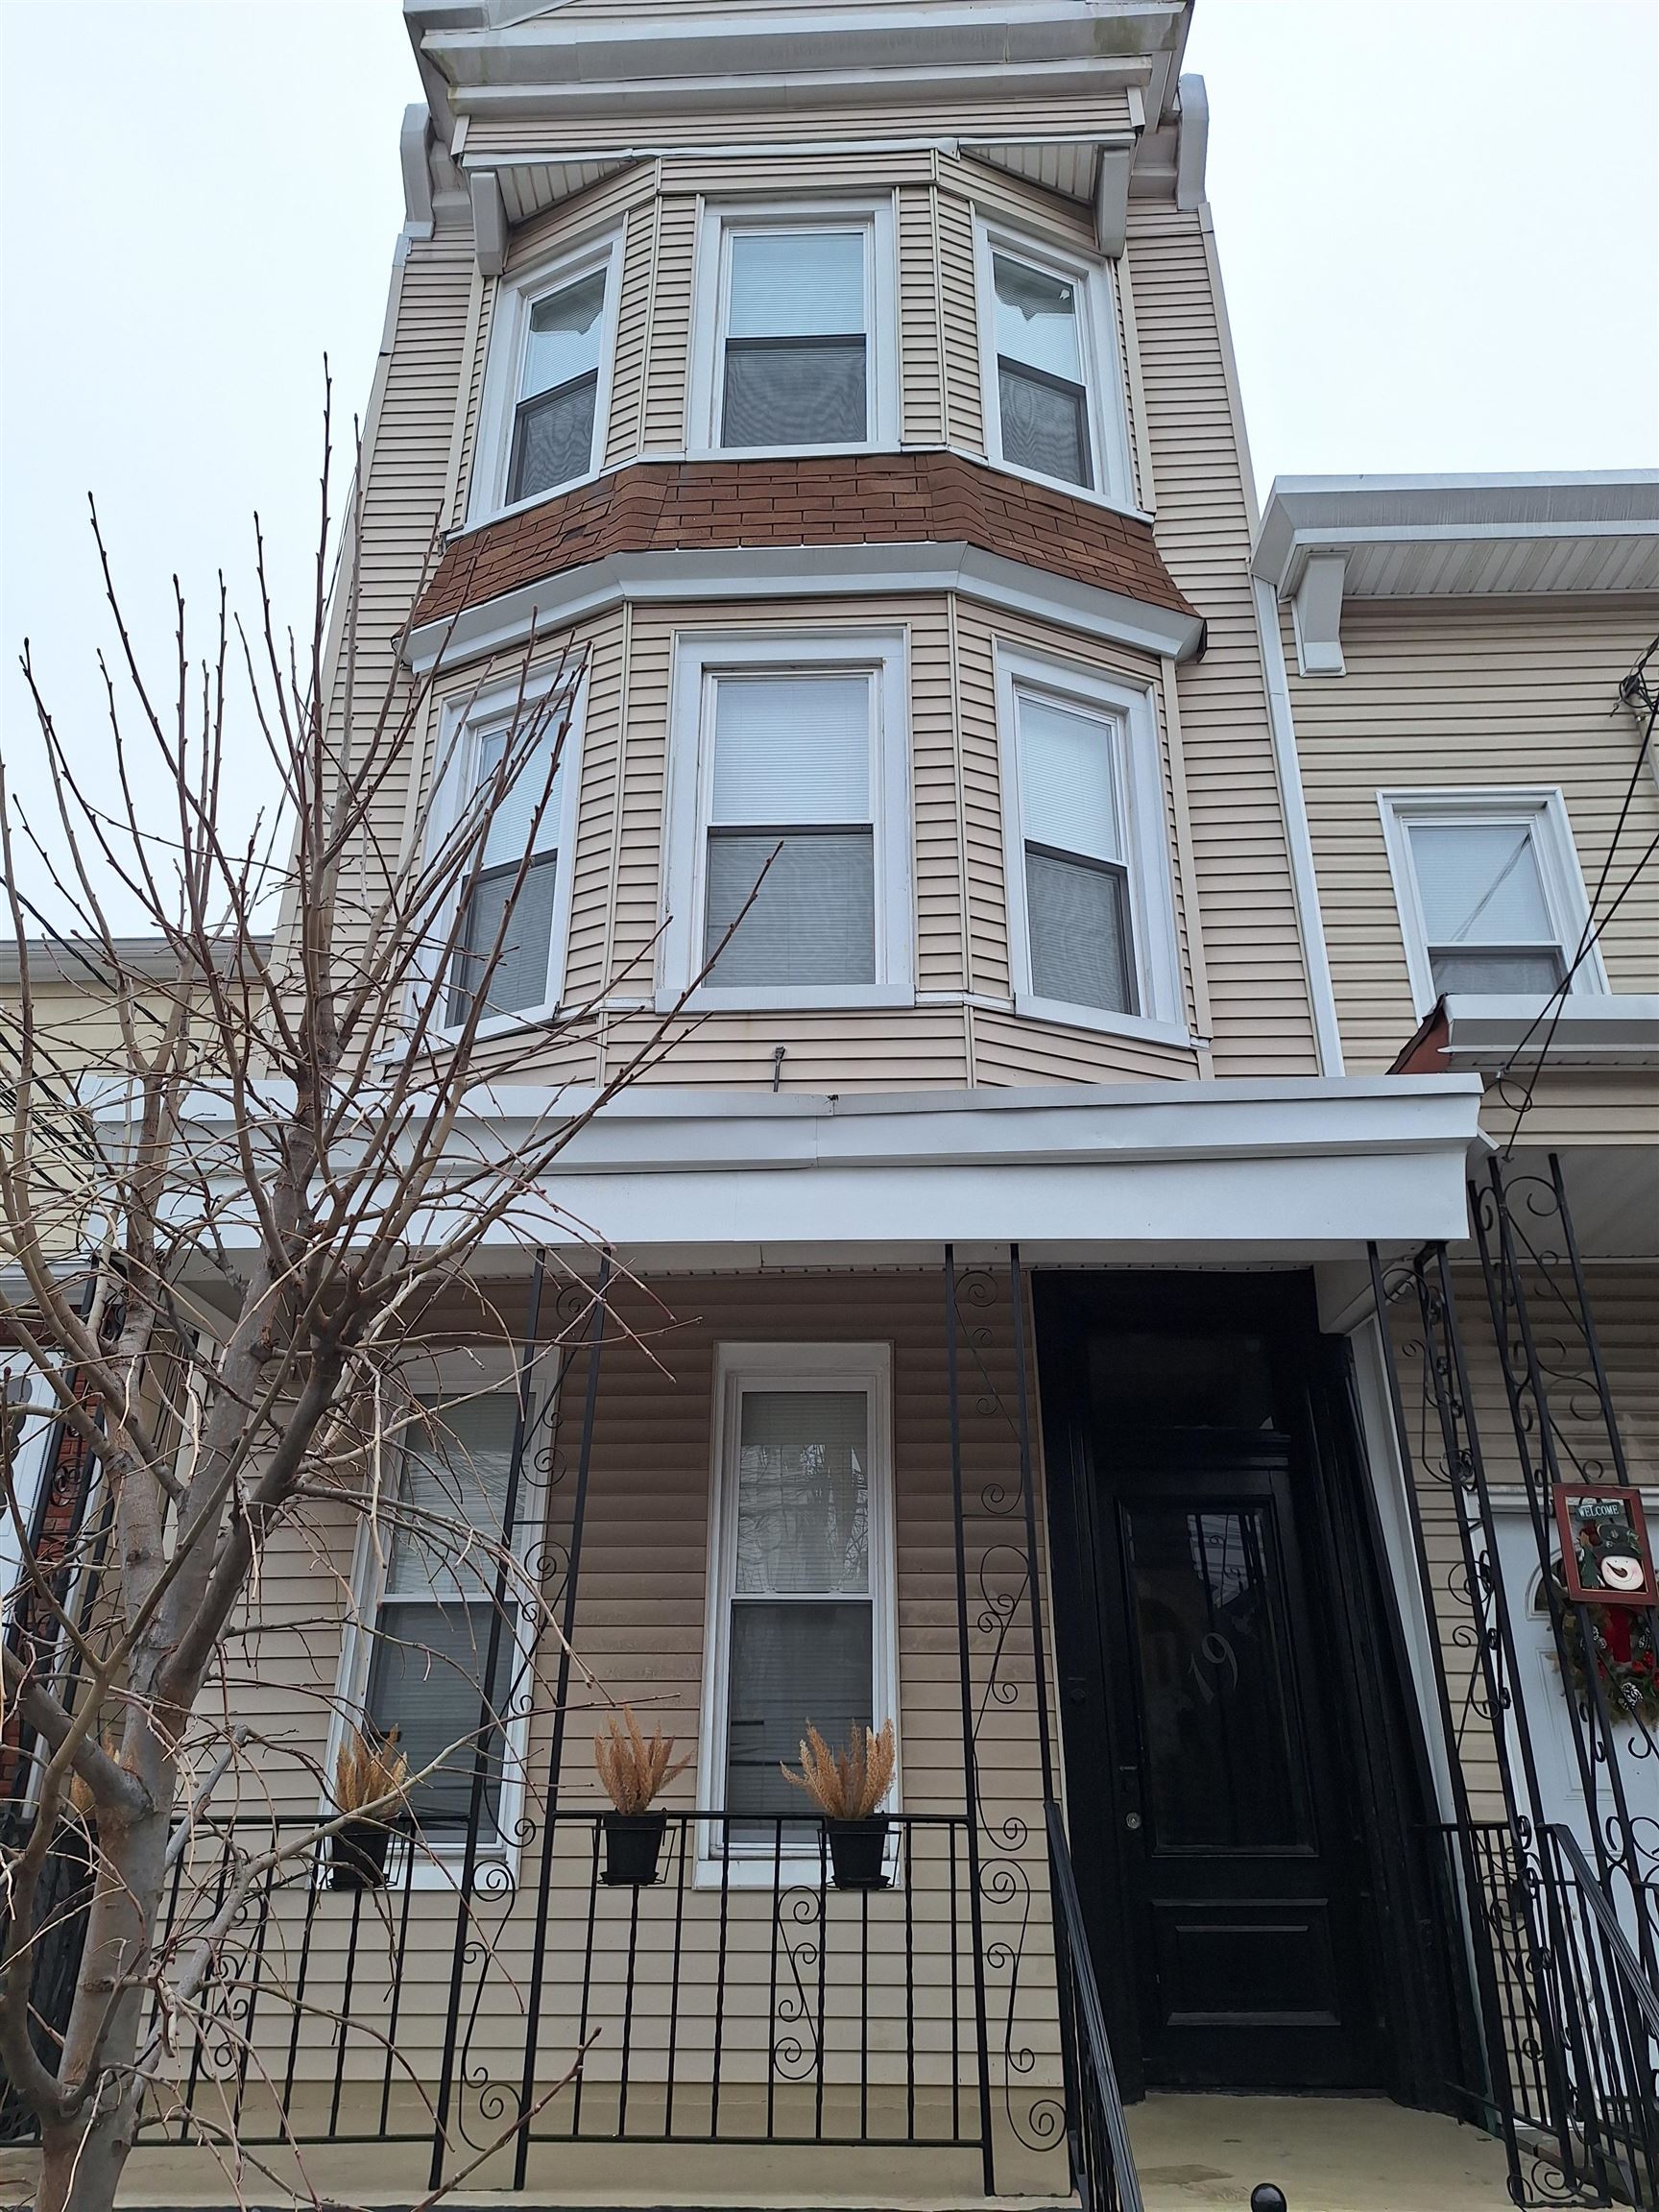 # 230019203 - For Rent in JERSEY CITY - Heights NJ